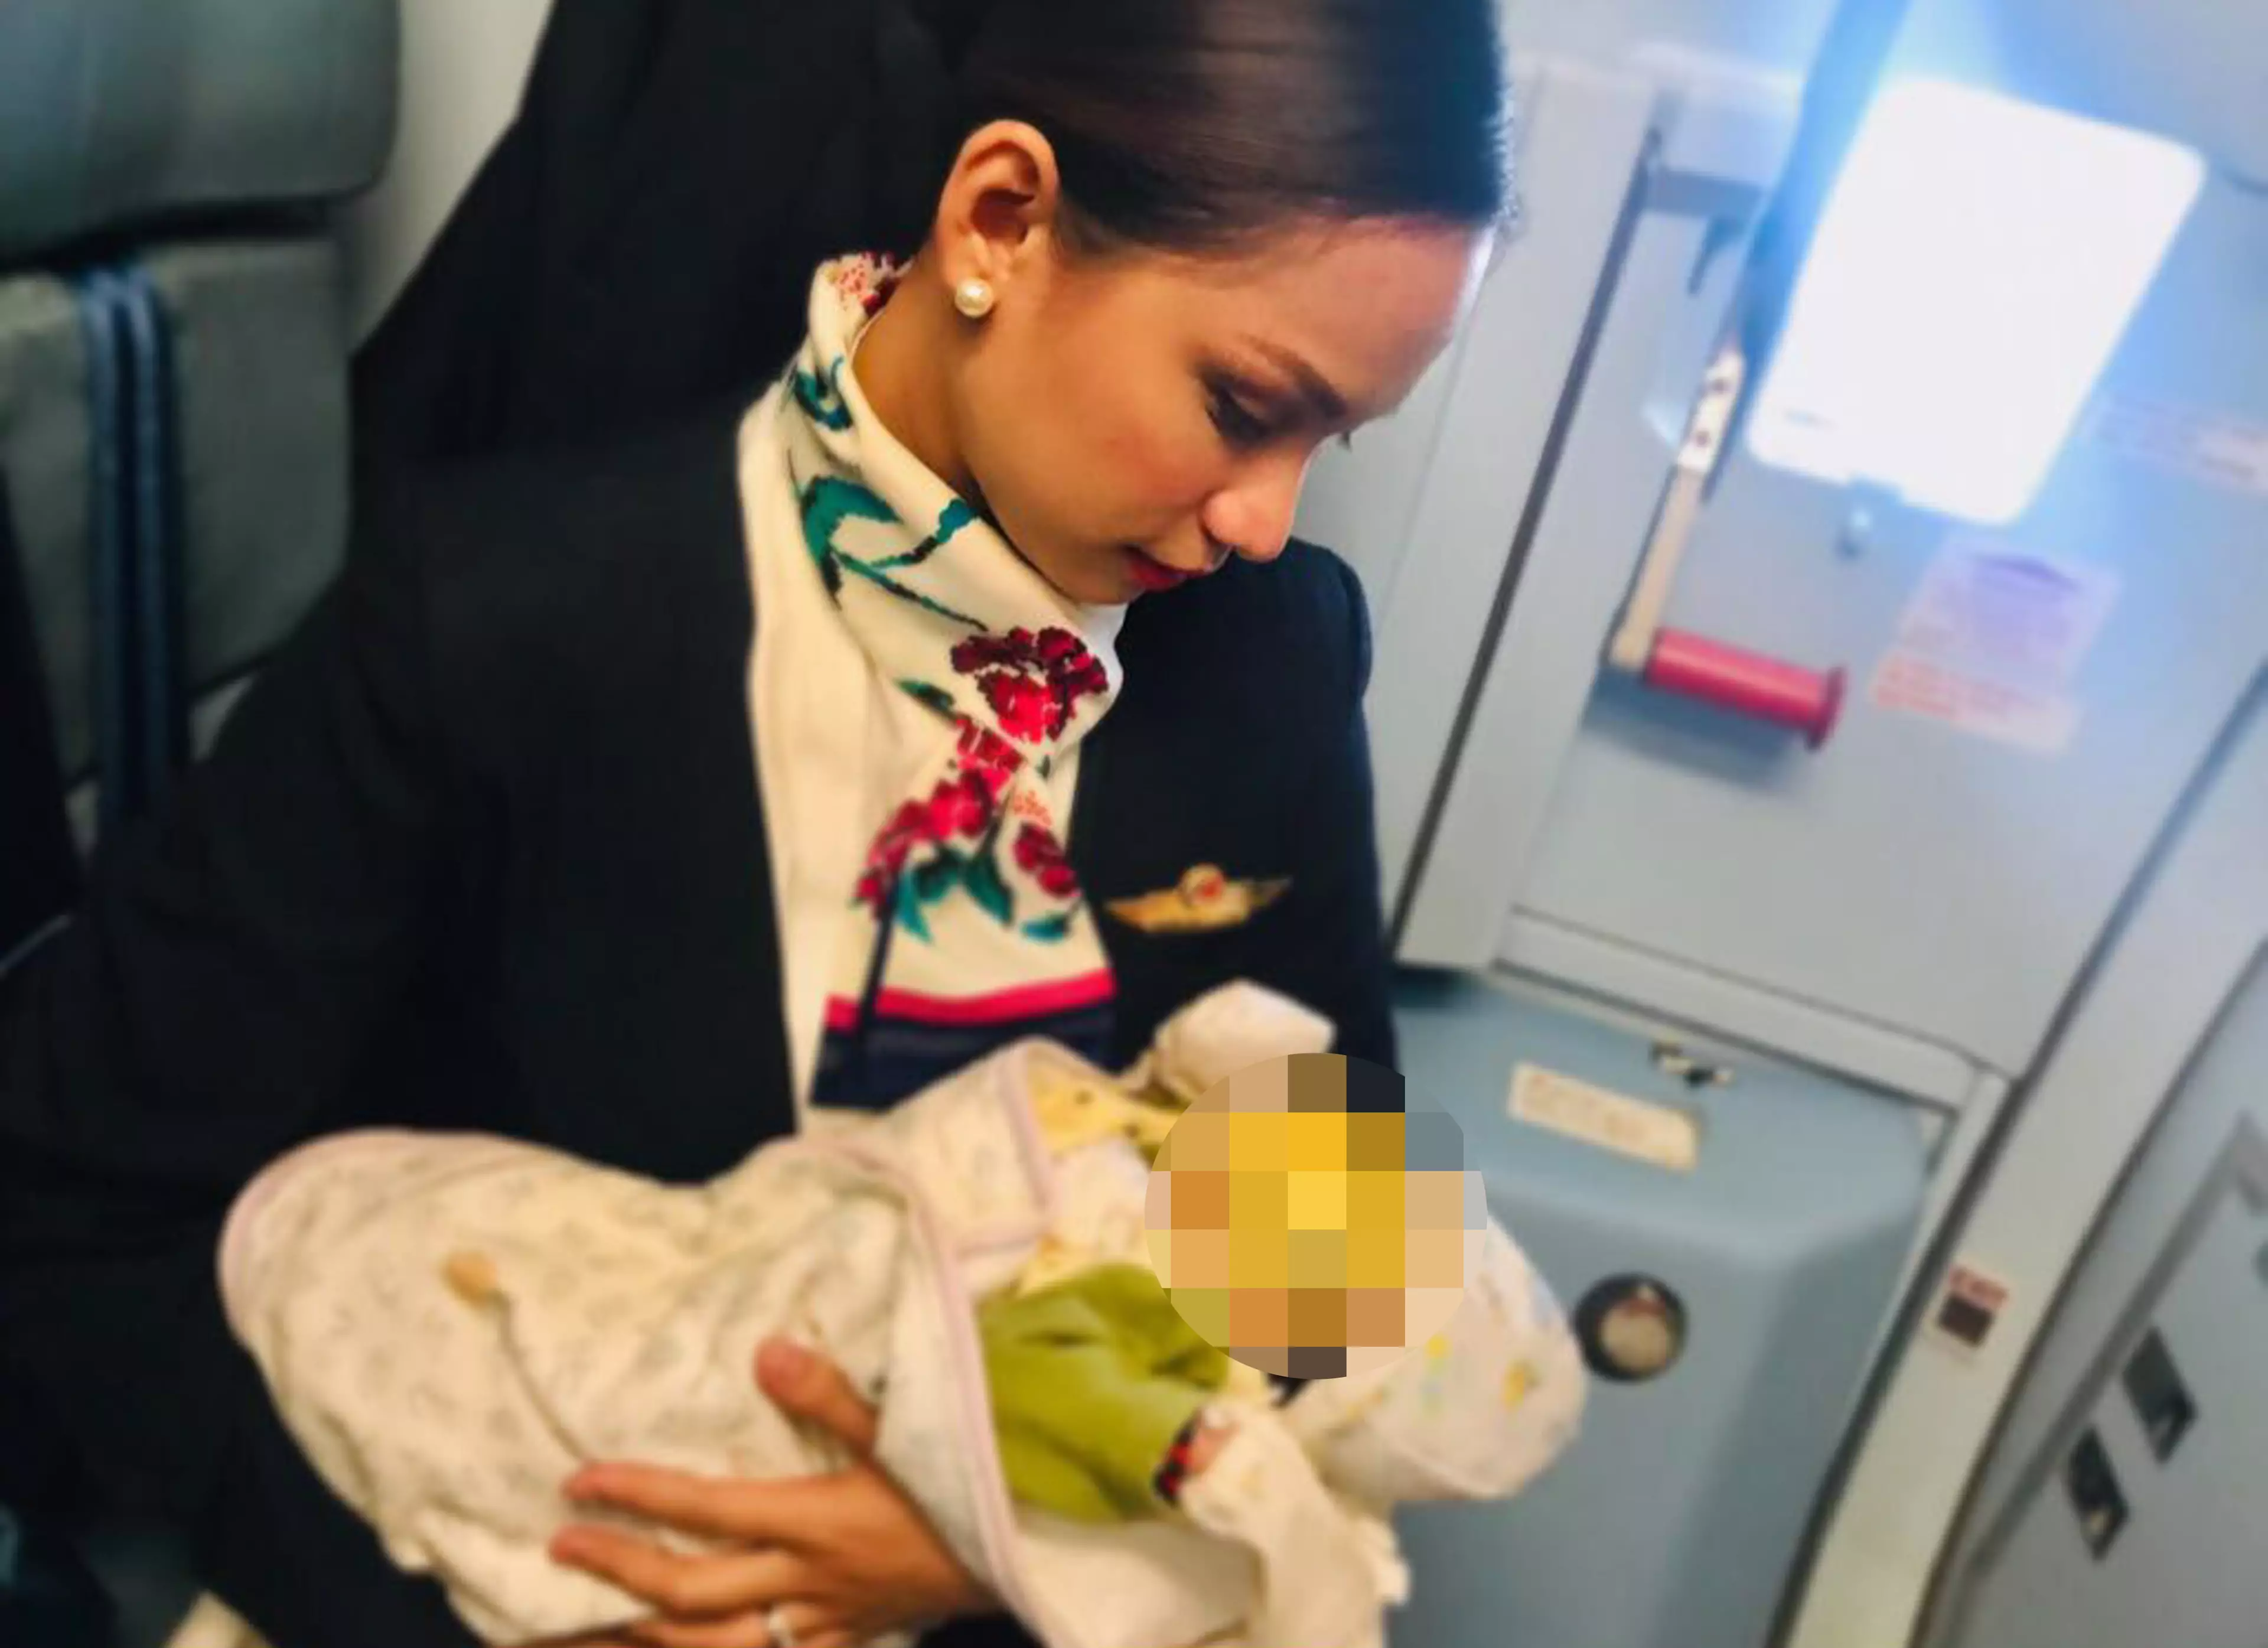 The baby's mum ran out of milk while on the plane.